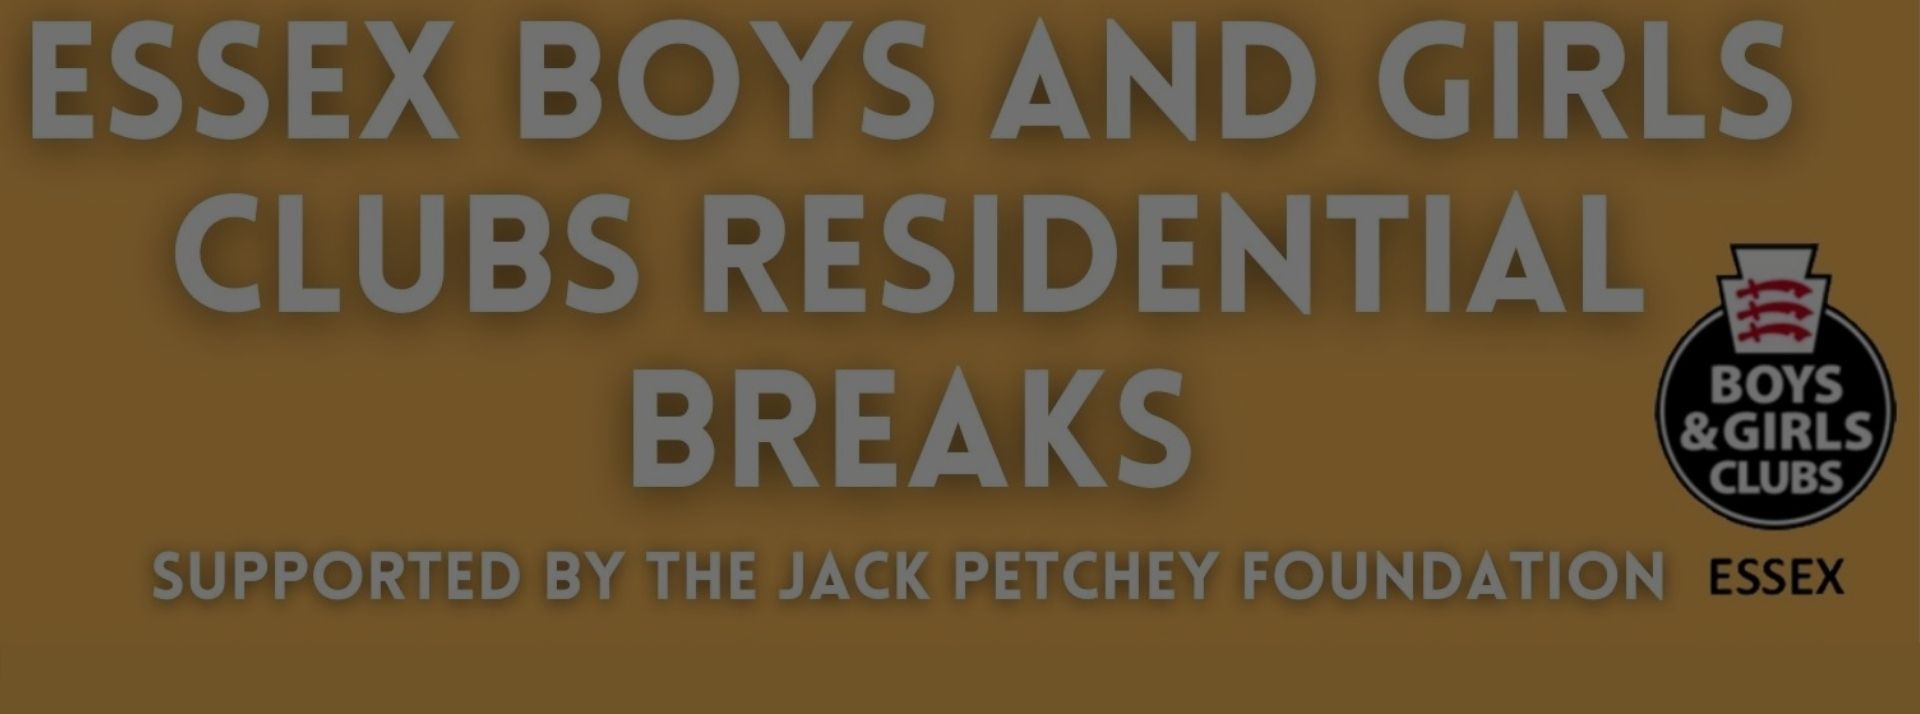 Residential Breaks Supported by Jack Petchey